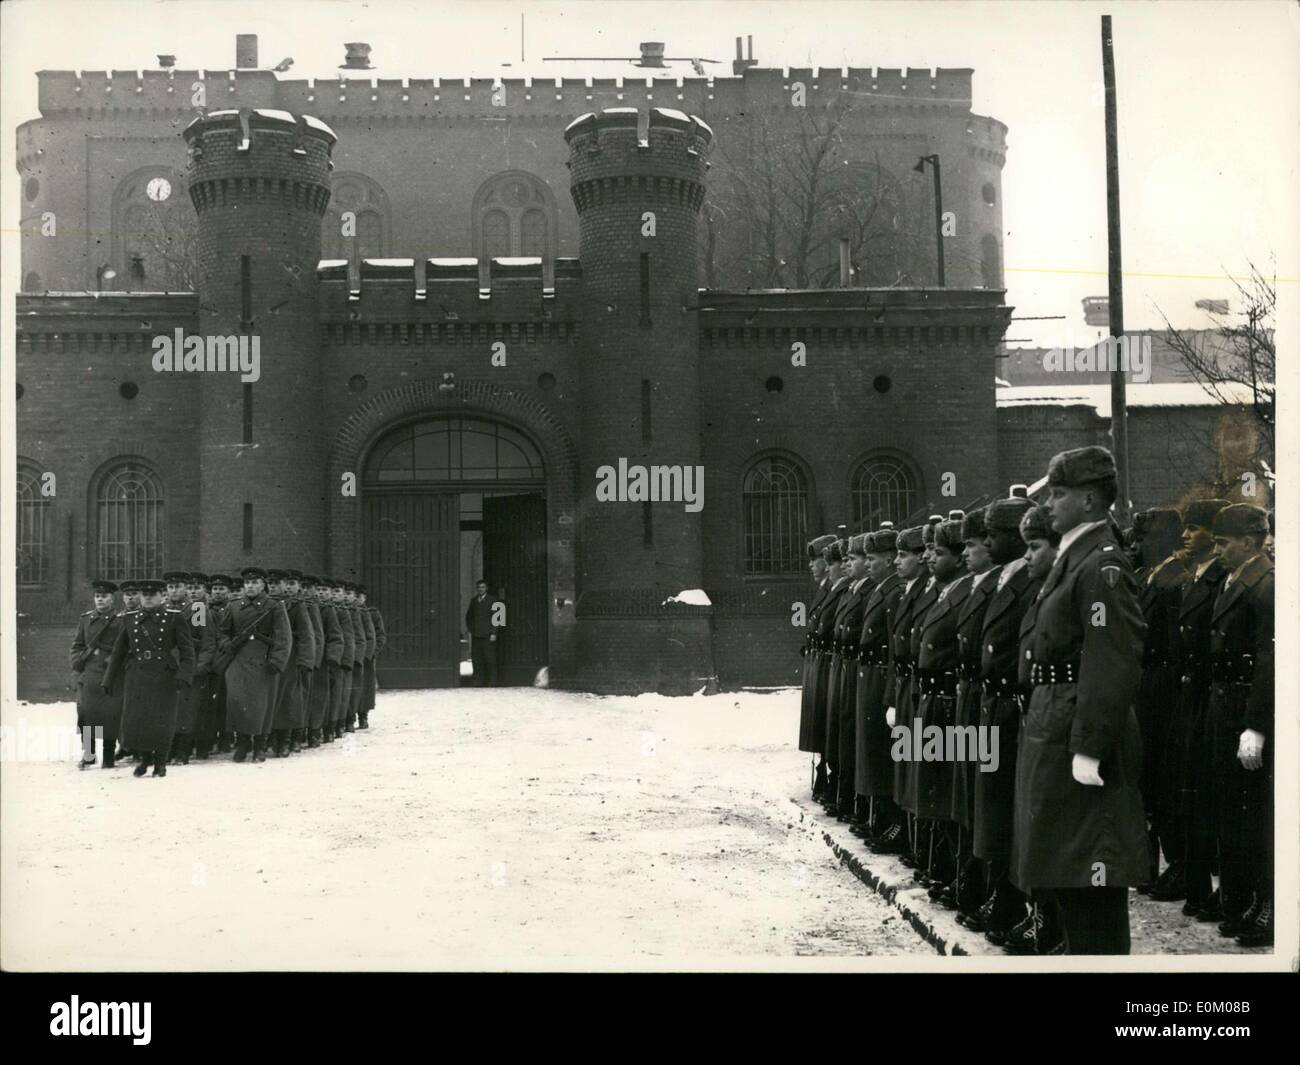 Dec. 25, 1952 - Changing of the Guard at Spandau Prison - Better Christmas for Prisoners? American soldiers took over watching the Spandau Prison from the Russian soldiers. Perhaps that means a better Christmas this year for the prisoners. Our picture shows the American soldiers in their fur hats as the Russian delegation marches by. Stock Photo